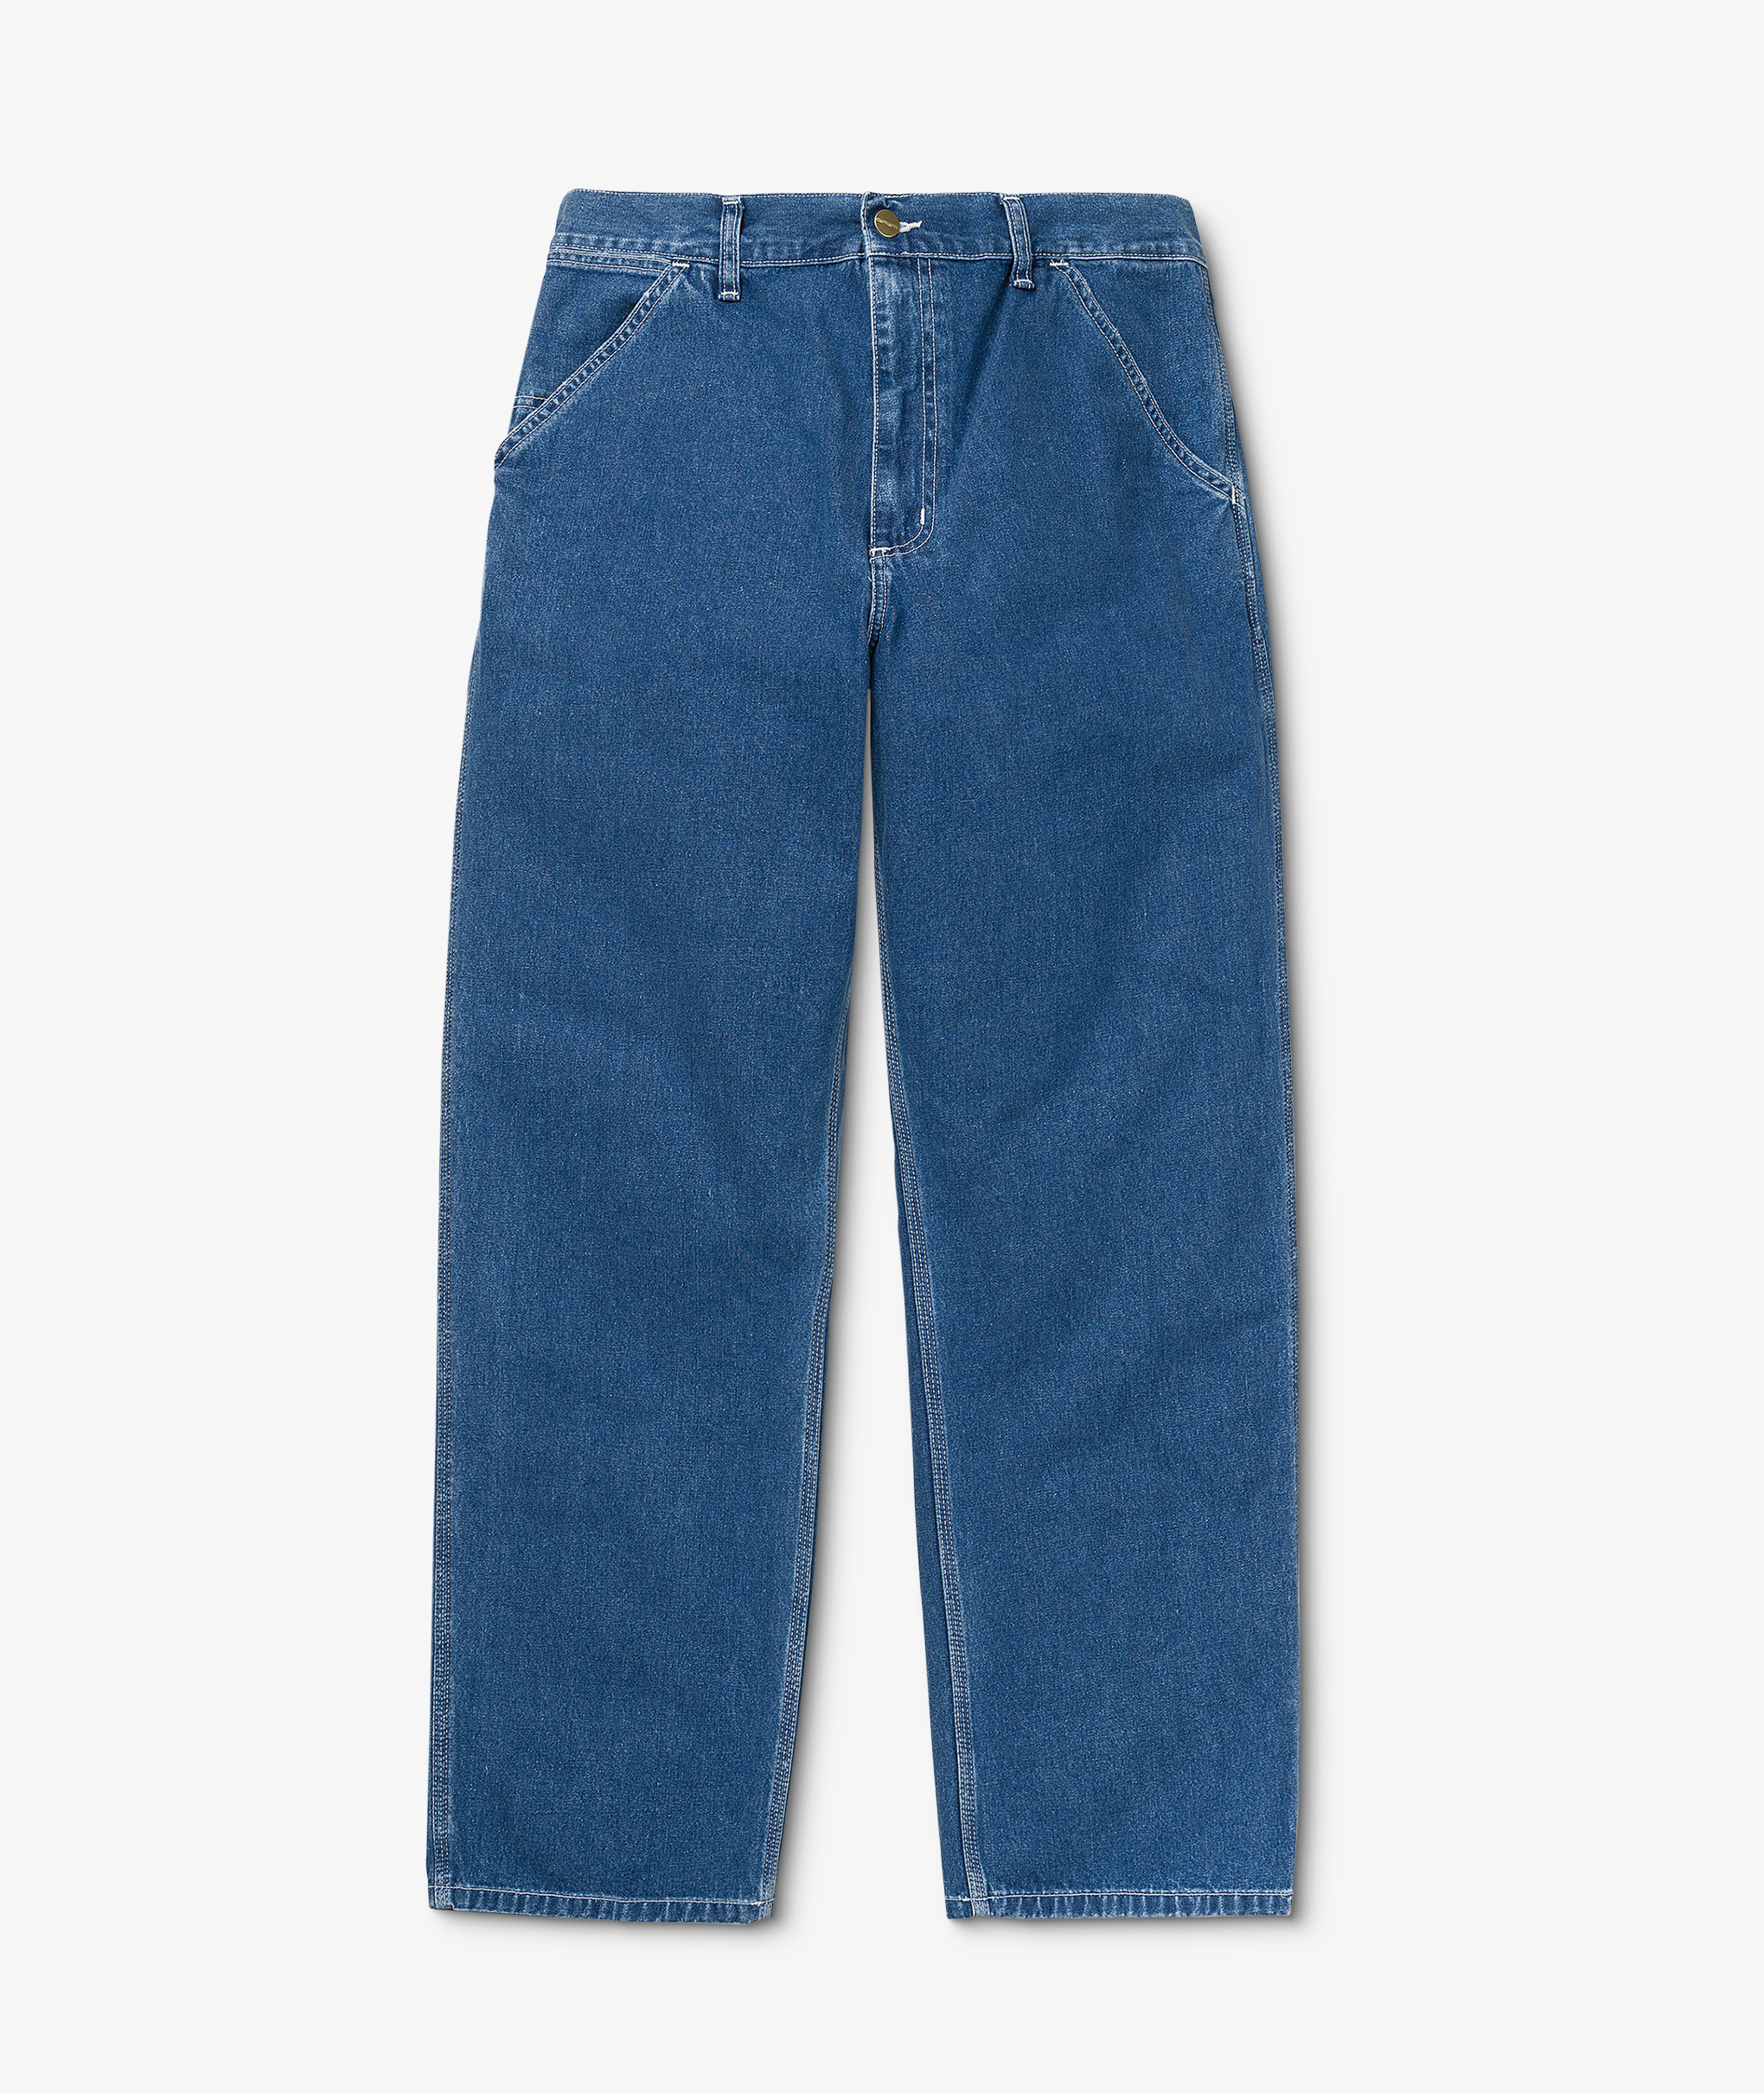 Norse Store | Shipping Worldwide - Carhartt WIP Simple Pant - BLUE ...